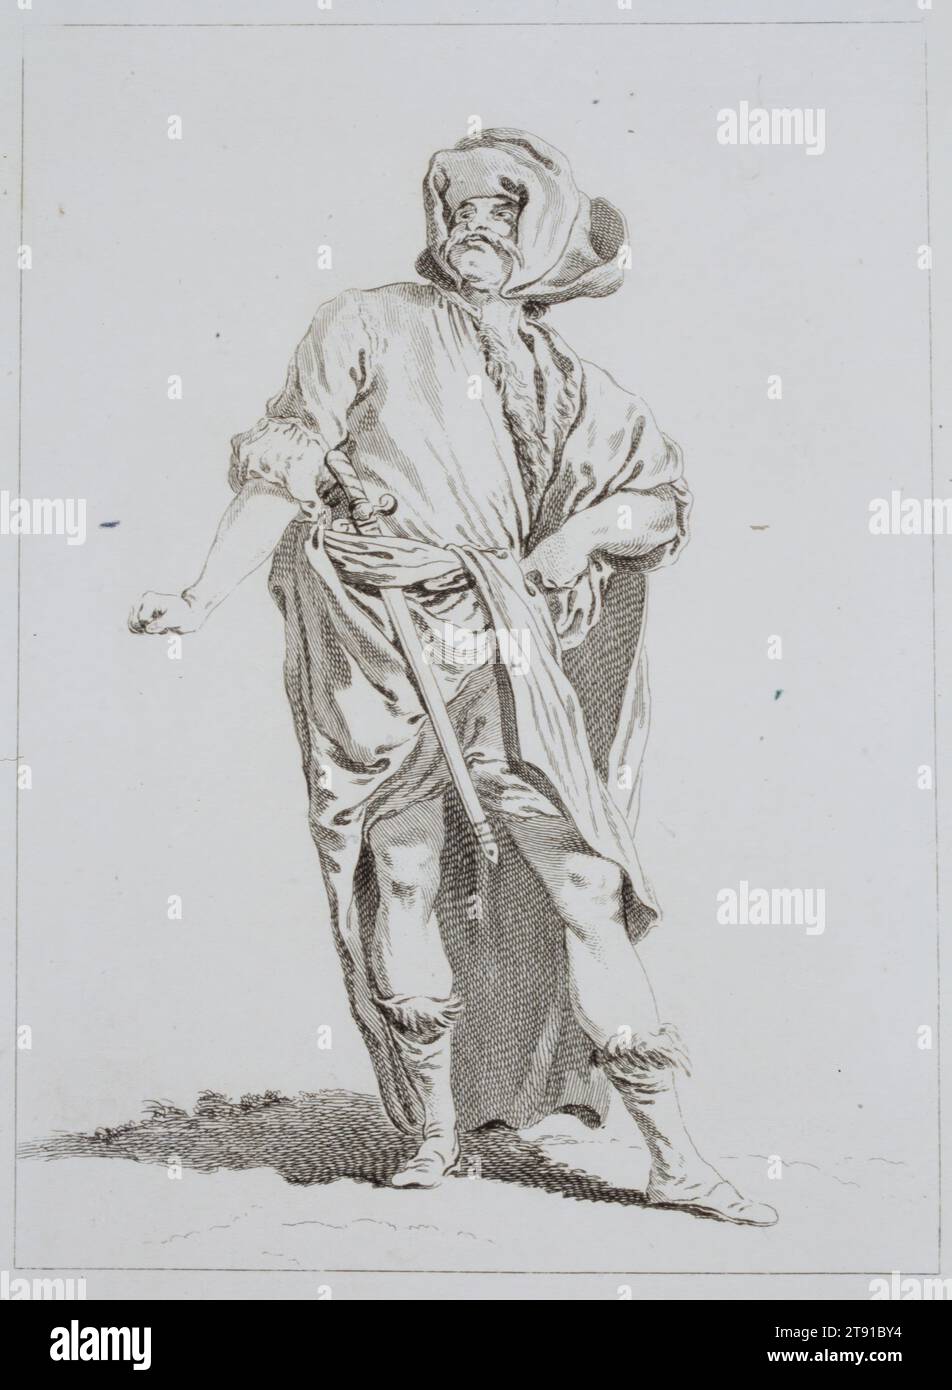 Standing Man with Sword, c. 1729-1738, Simon François Ravenet I; Architect: after Carle Vanloo, French, 1705-1765, 9 1/4 x 6 5/8 in. (23.5 x 16.83 cm) (plate)14 7/8 x 10 3/8 in. (37.78 x 26.35 cm) (sheet), Etching, France, 18th century Stock Photo